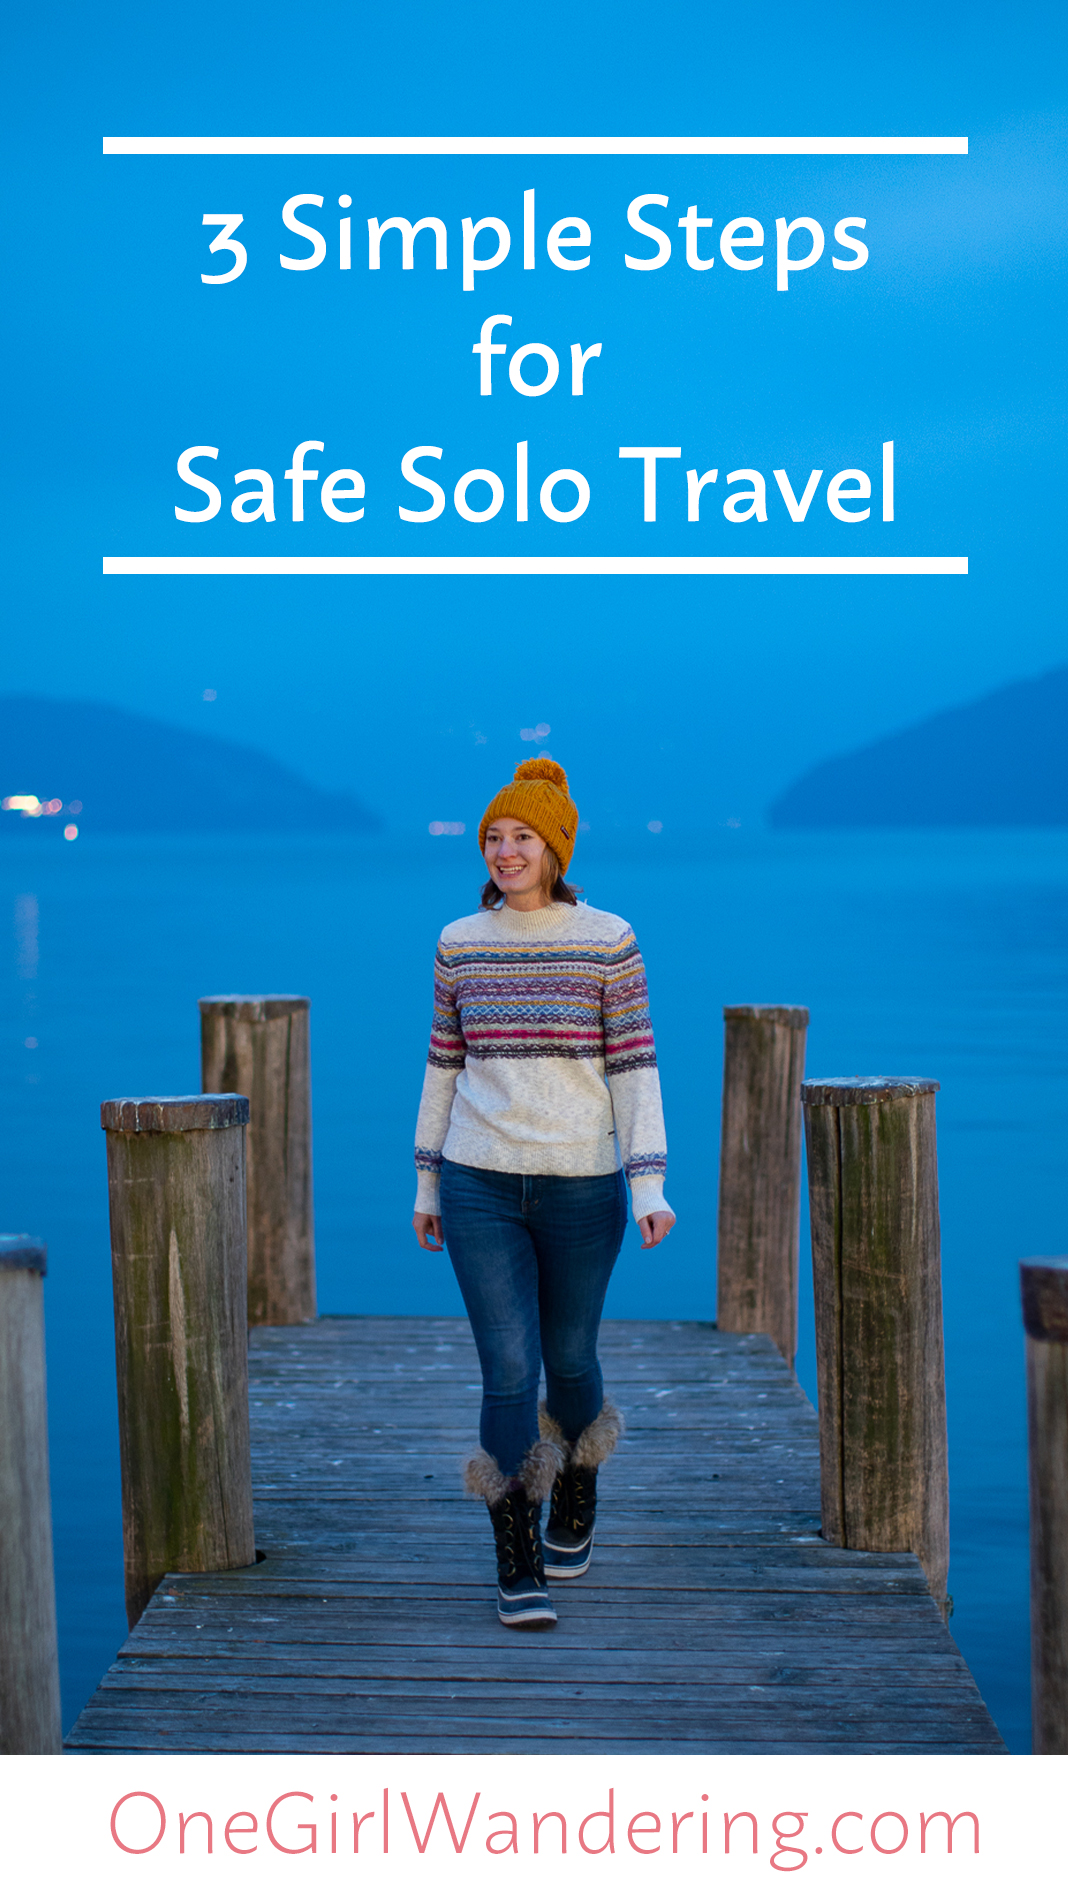 3 Simple Steps for Safe Solo Travel - One Girl Wandering